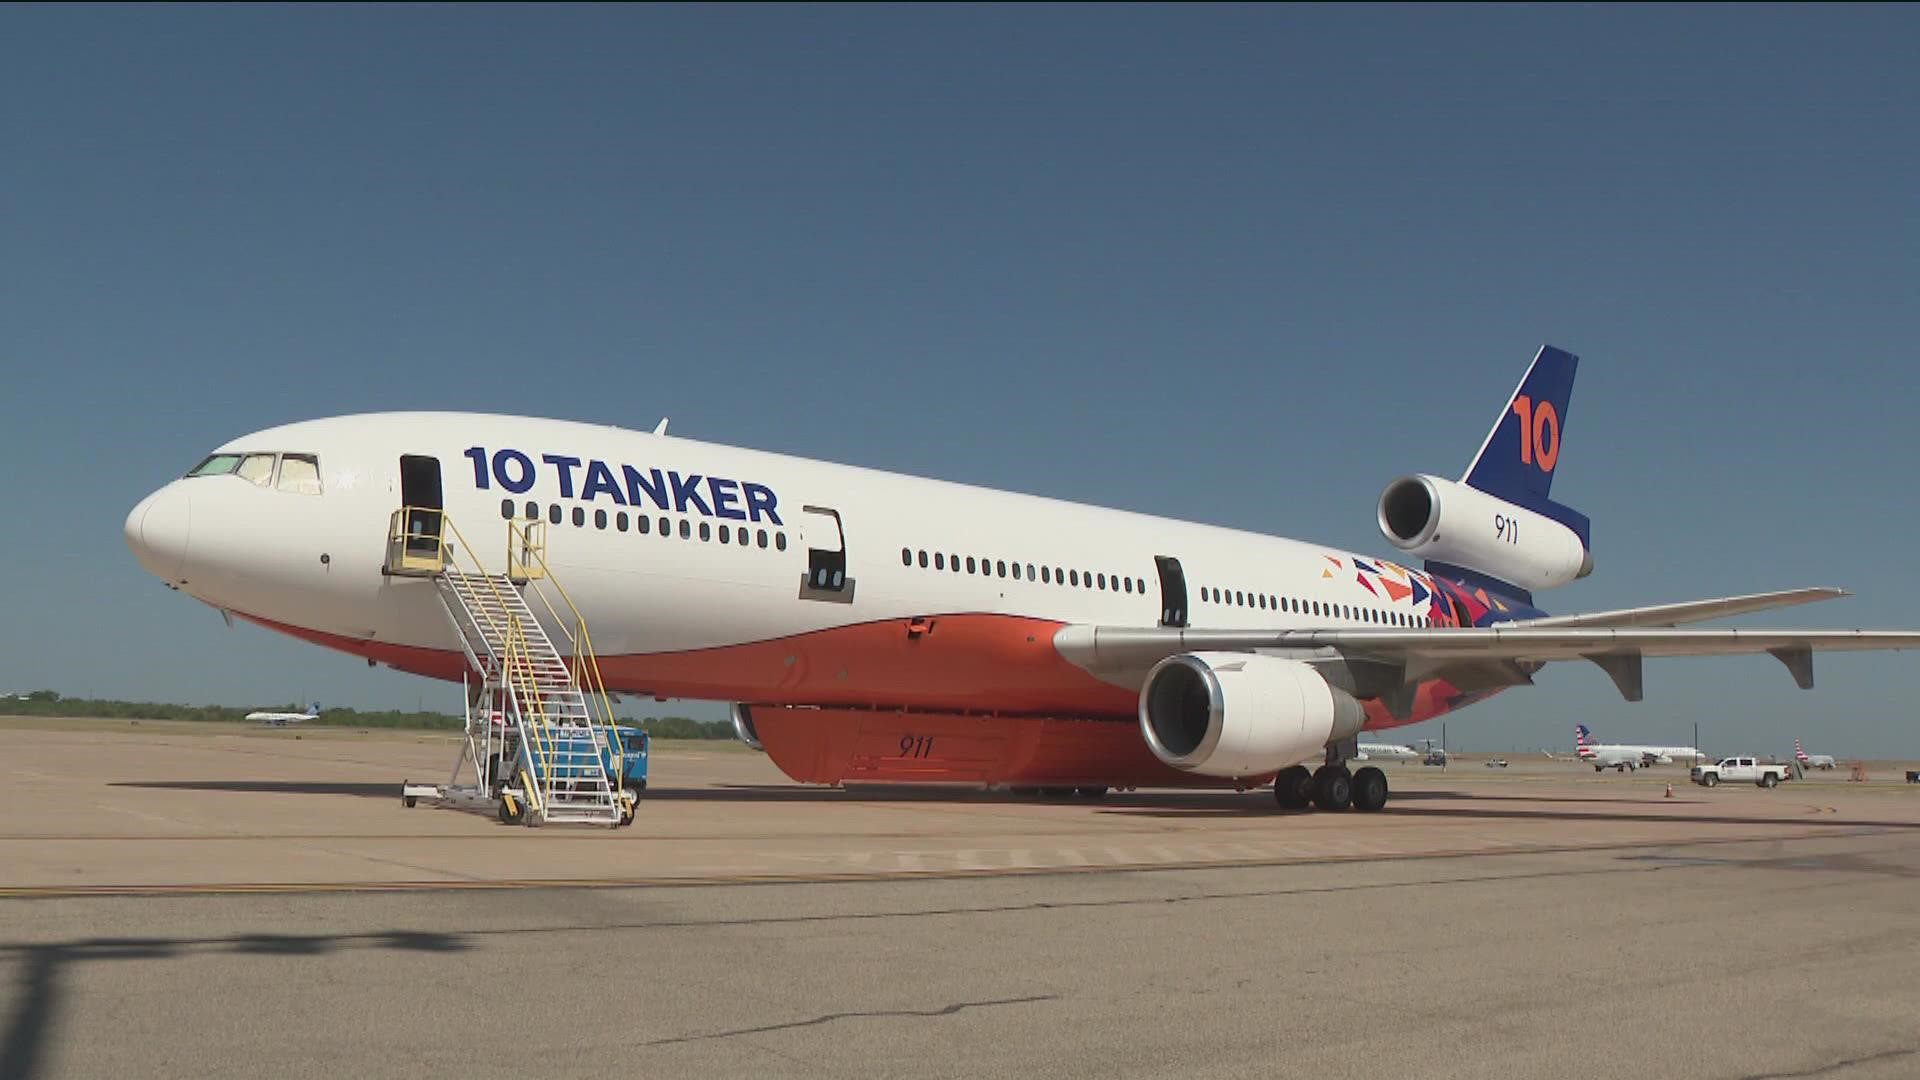 It has been a very active wildfire season for Texas and the massive DC-10 air tanker has helped bring those fires under control.